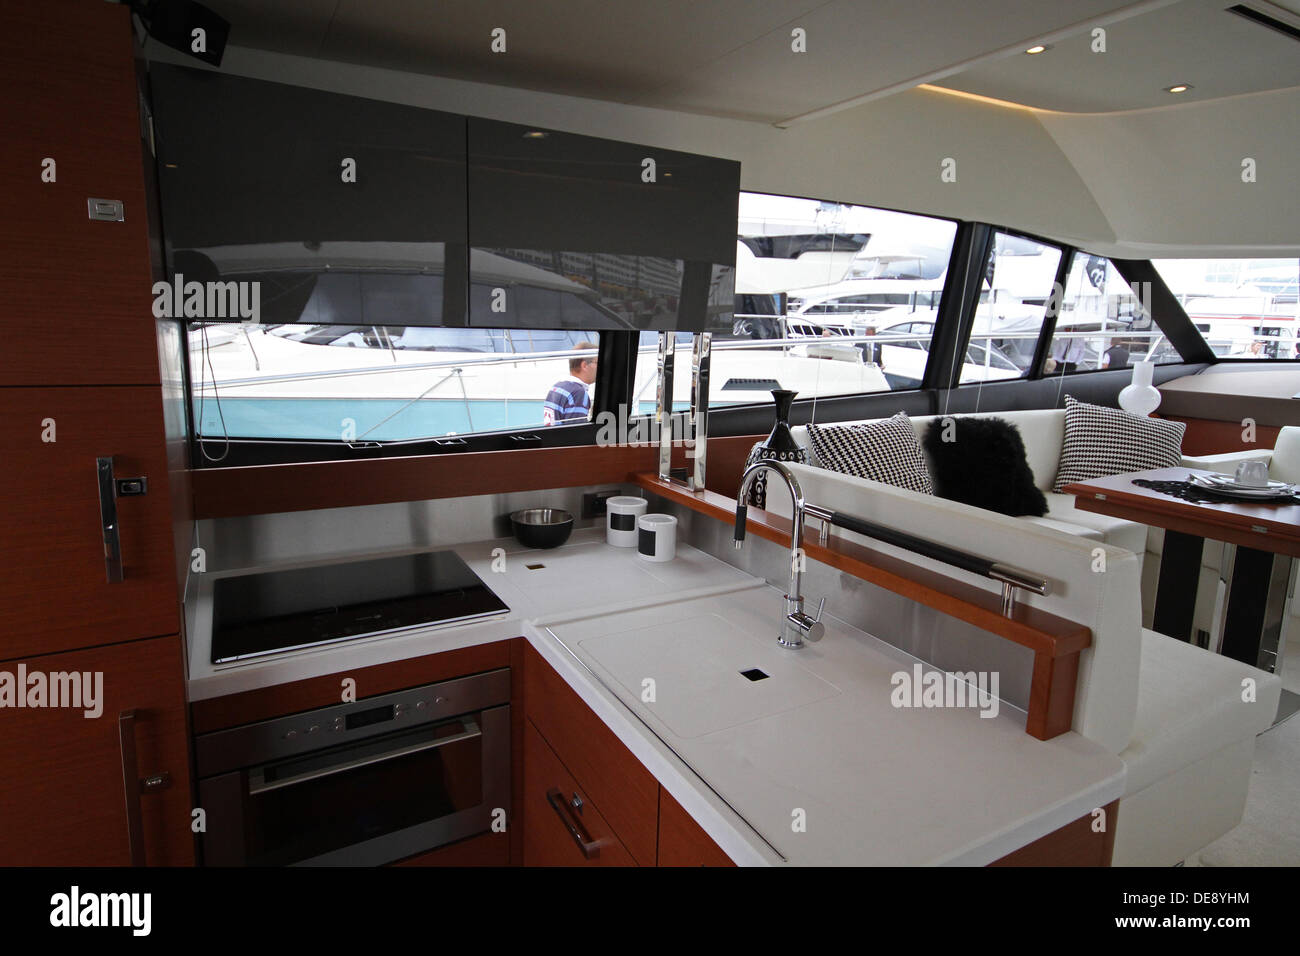 Southampton,13th September 2013,The Galley area onboard the Prestige 50 Credit: Keith Larby/Alamy Live News Stock Photo